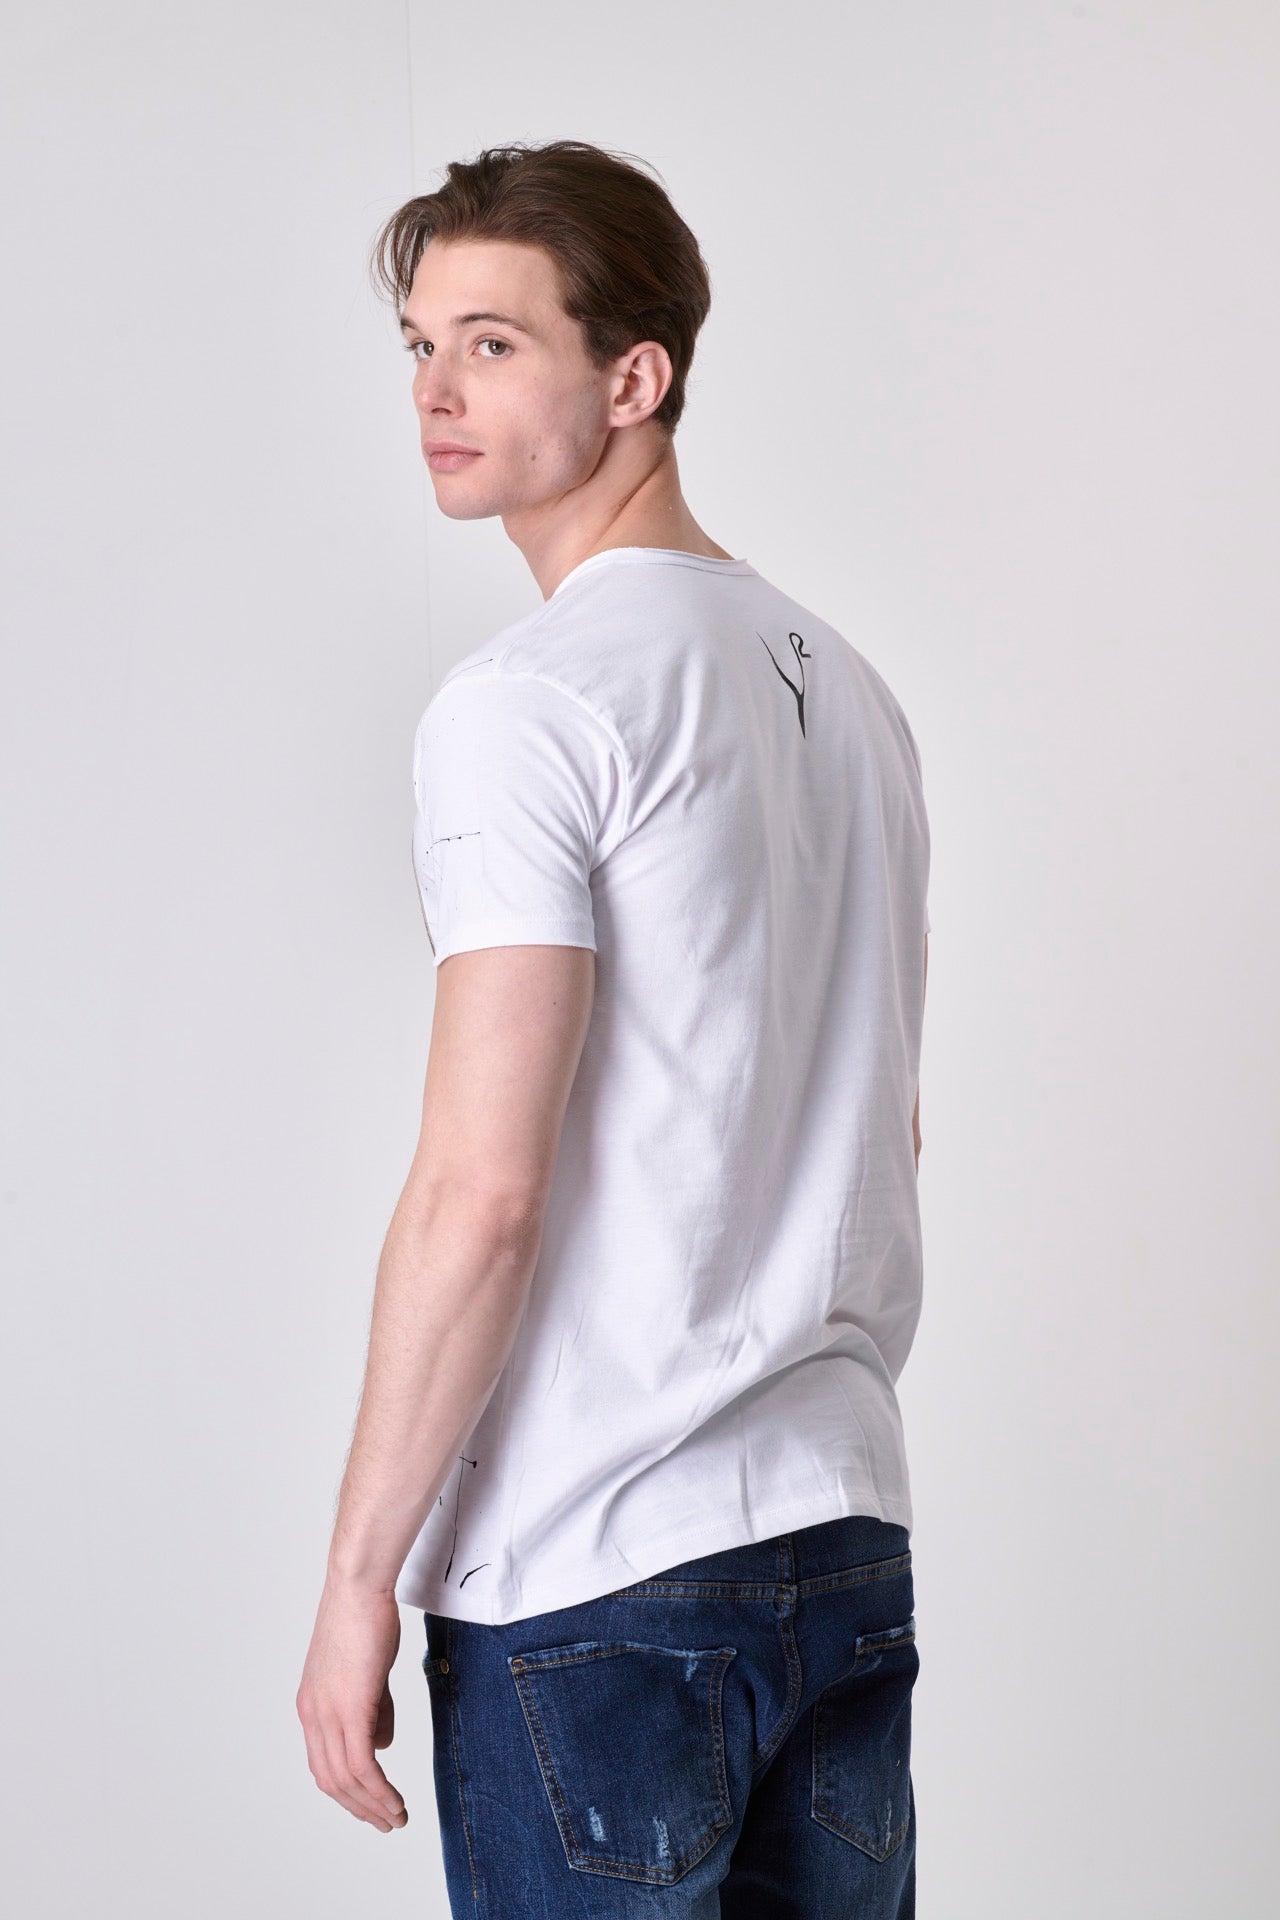 White T-Shirt with Camouflage pocket and paint splashes